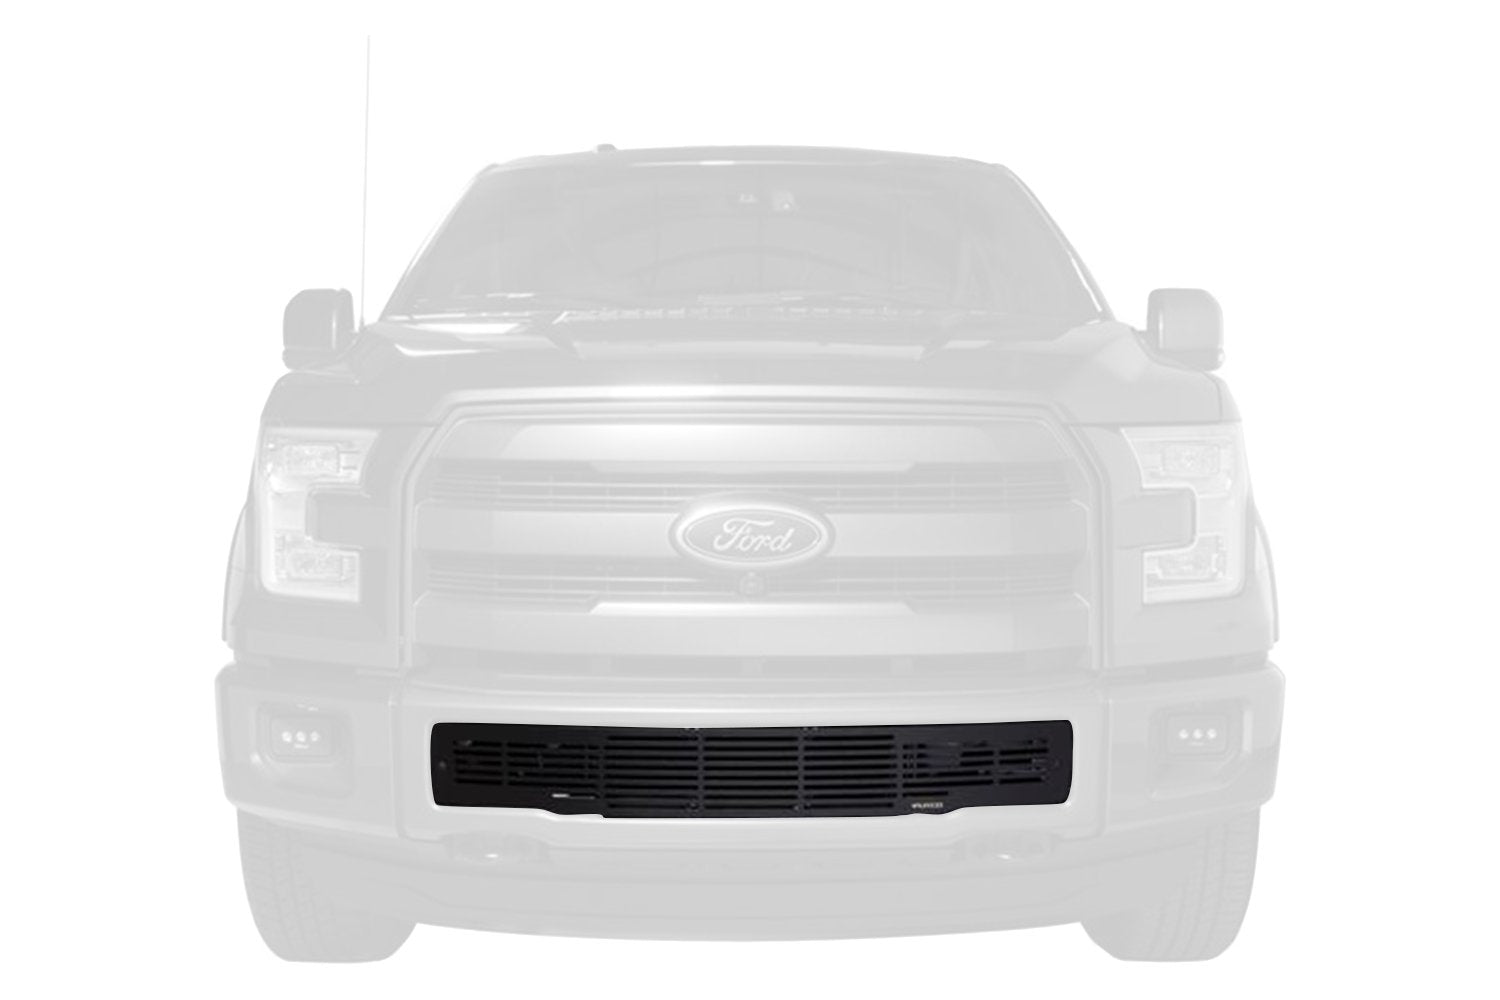 Putco 87160 Billet Grille For Ford F-150, Stainless Steel Bumper Insert